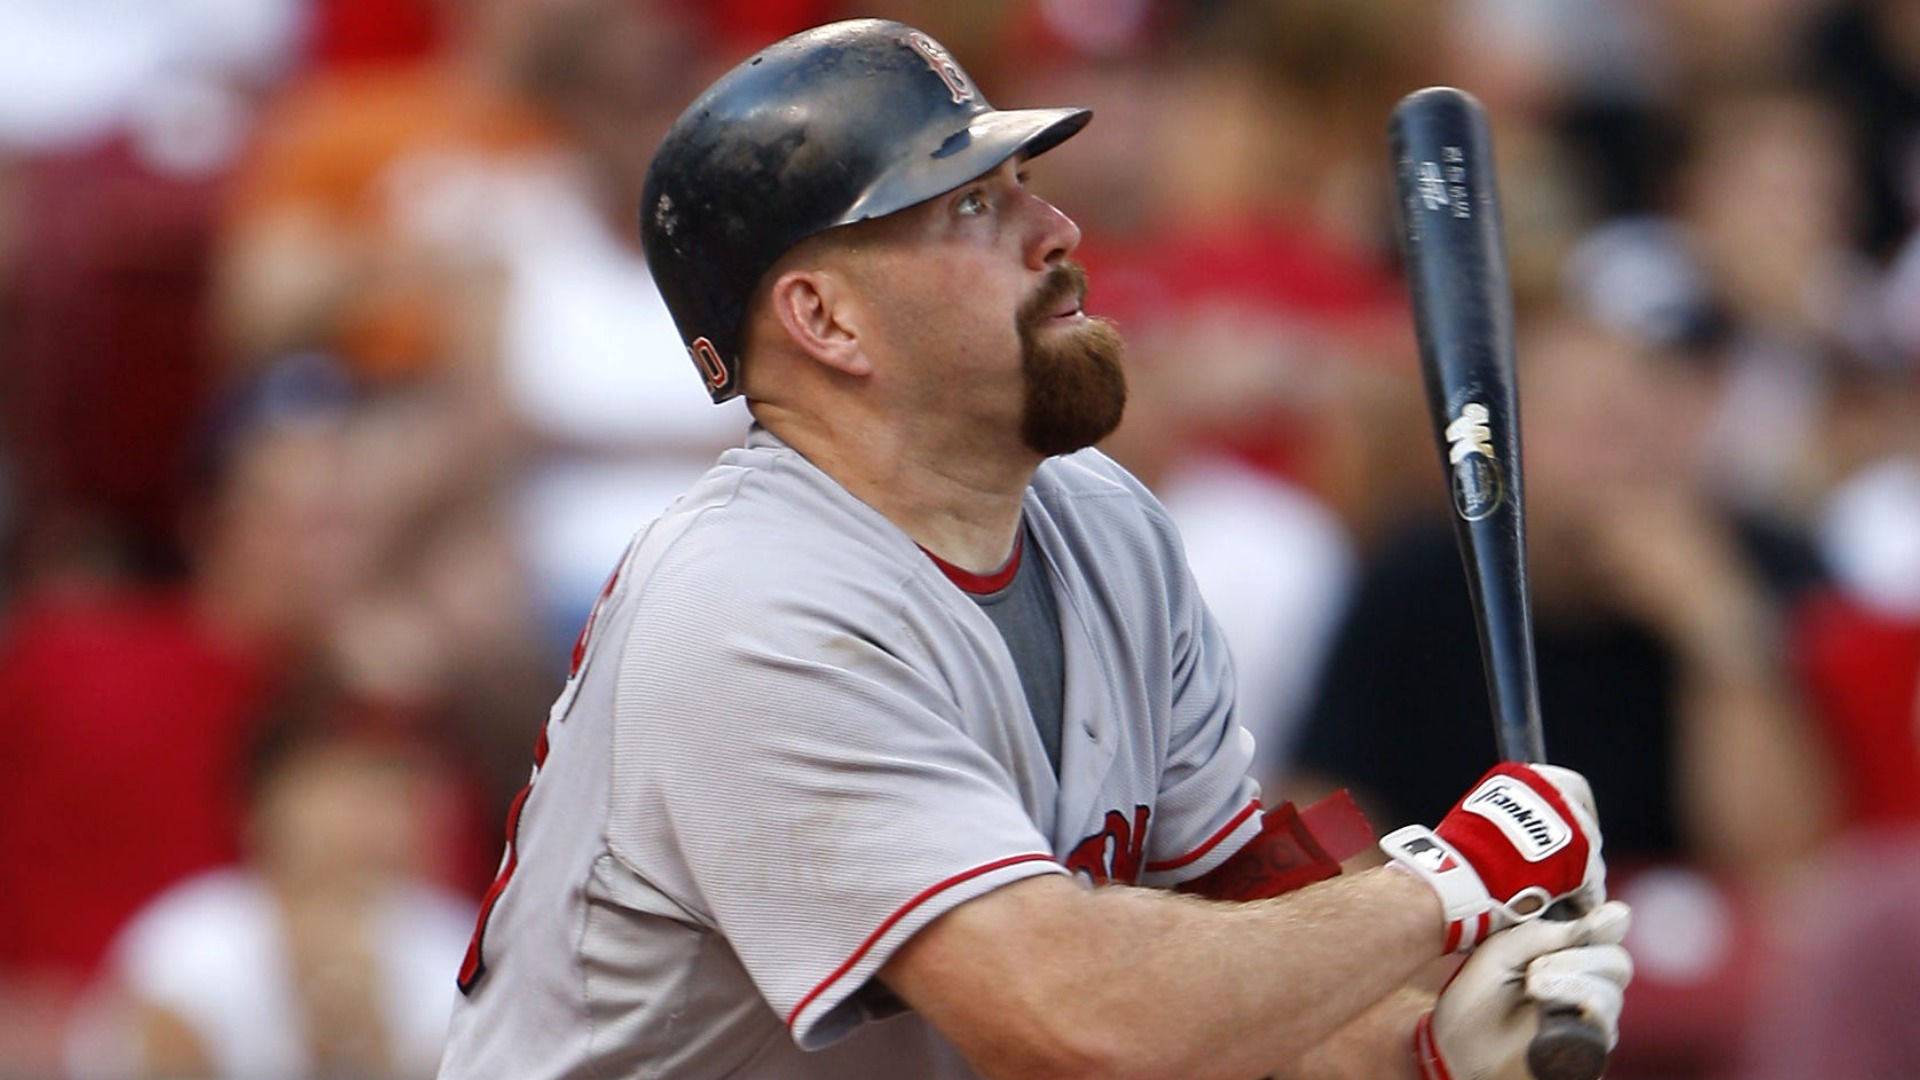 The Red Sox and the Kevin Youkilis trade, one year later - Over